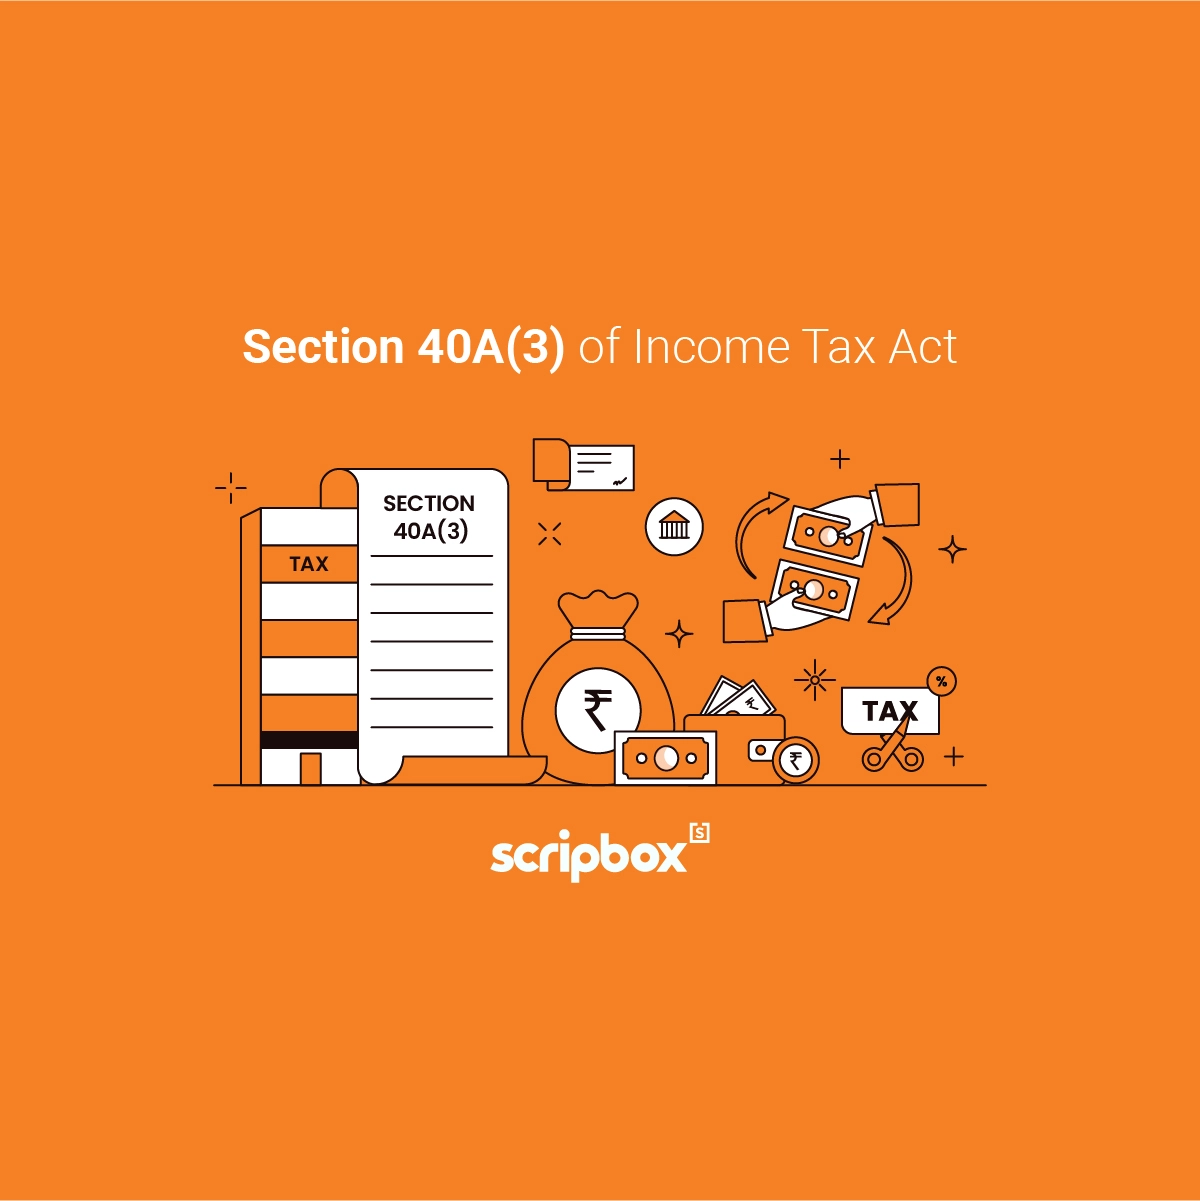 40a(3) of income tax act